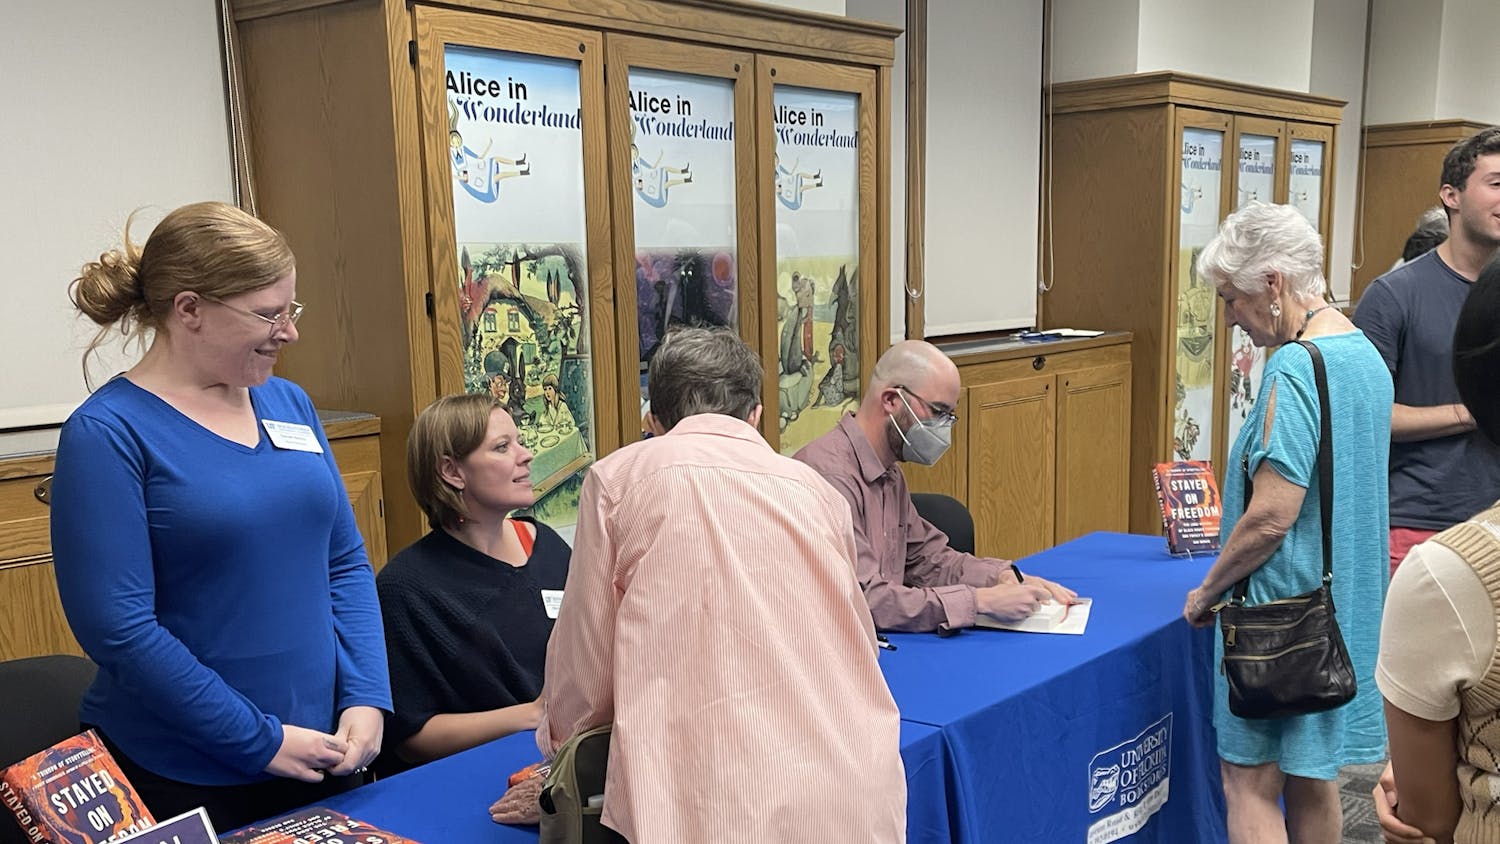 Dr. Dan Berger, a UF alum and author, signs his books and talks with attendees at a UF Samuel Proctor Oral History Program event on Thursday, Feb. 23, 2023.